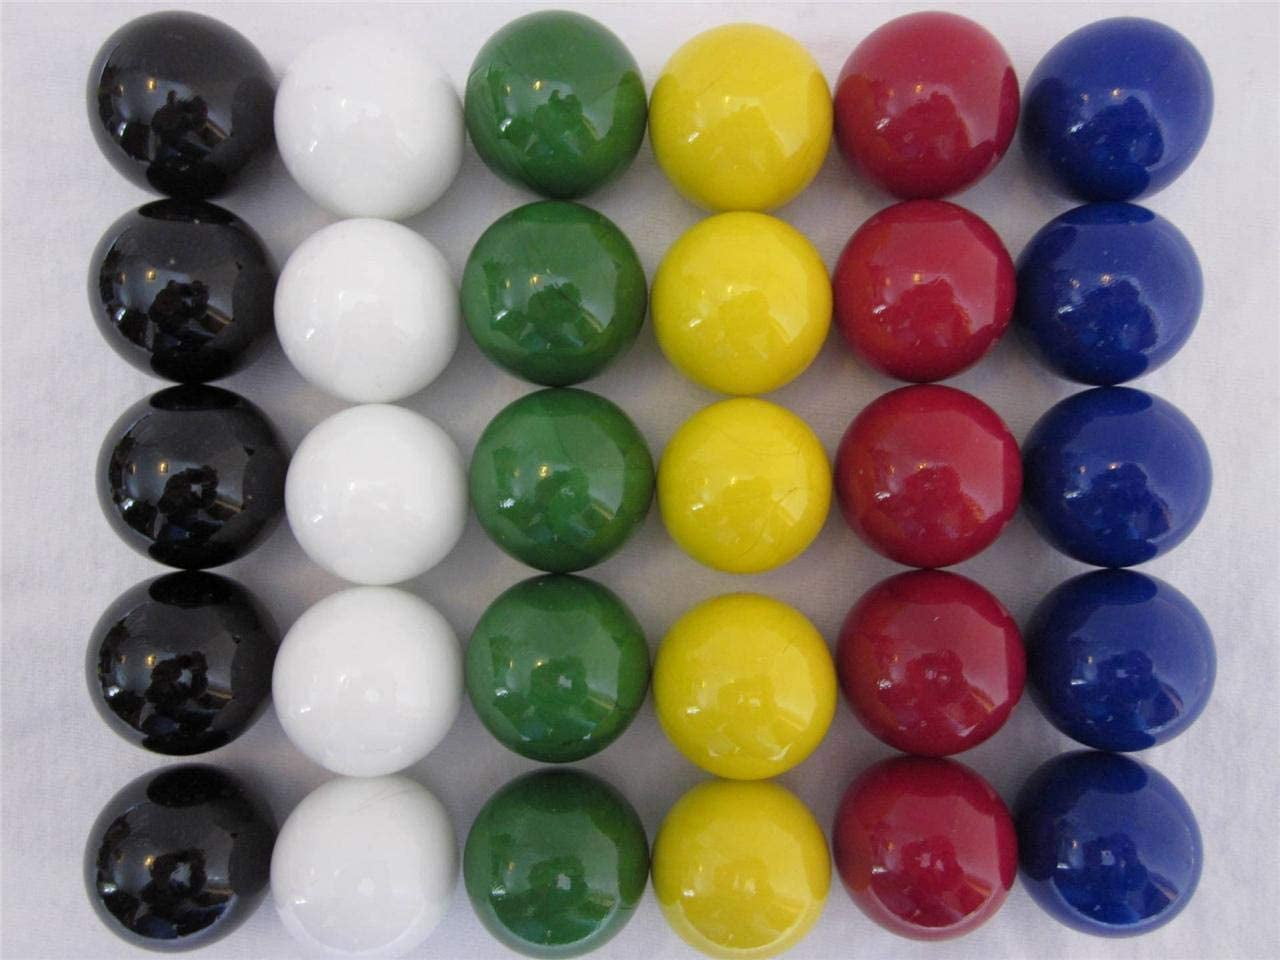 MARBLES 2 POUNDS 9/16 INCH 6 COLOR CHINESE CHECKERS MEGA MARBLES FREE SHIPPING 